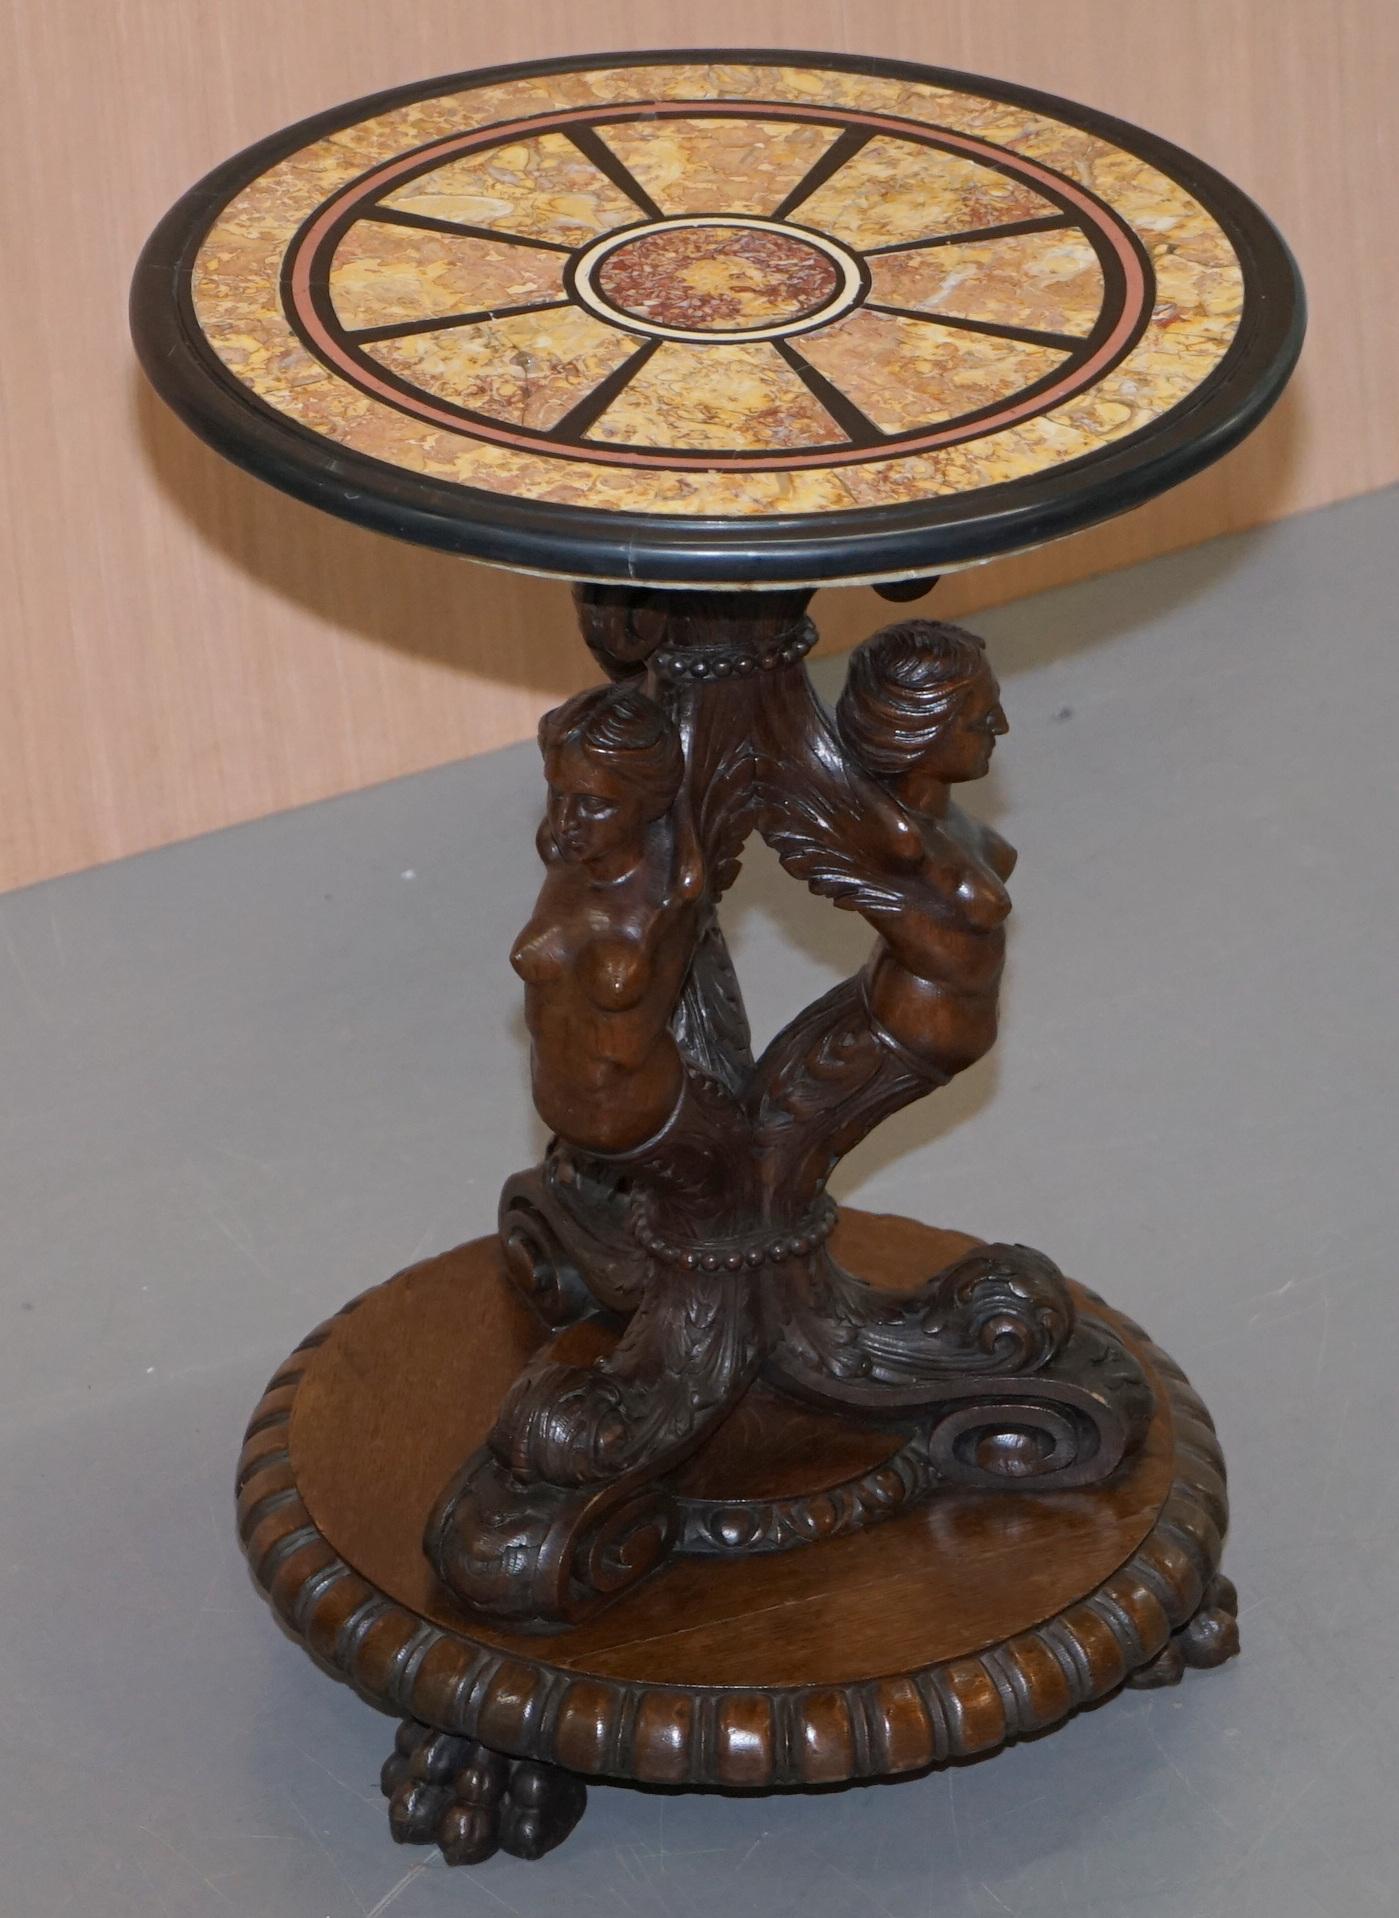 We are delighted to offer for sale this exceptionally fine circa 1800 hand carved English Oak side table with three maidens busts and a later circa 1840 Grand tour marble top

This table is an absolute tour de force is style design and